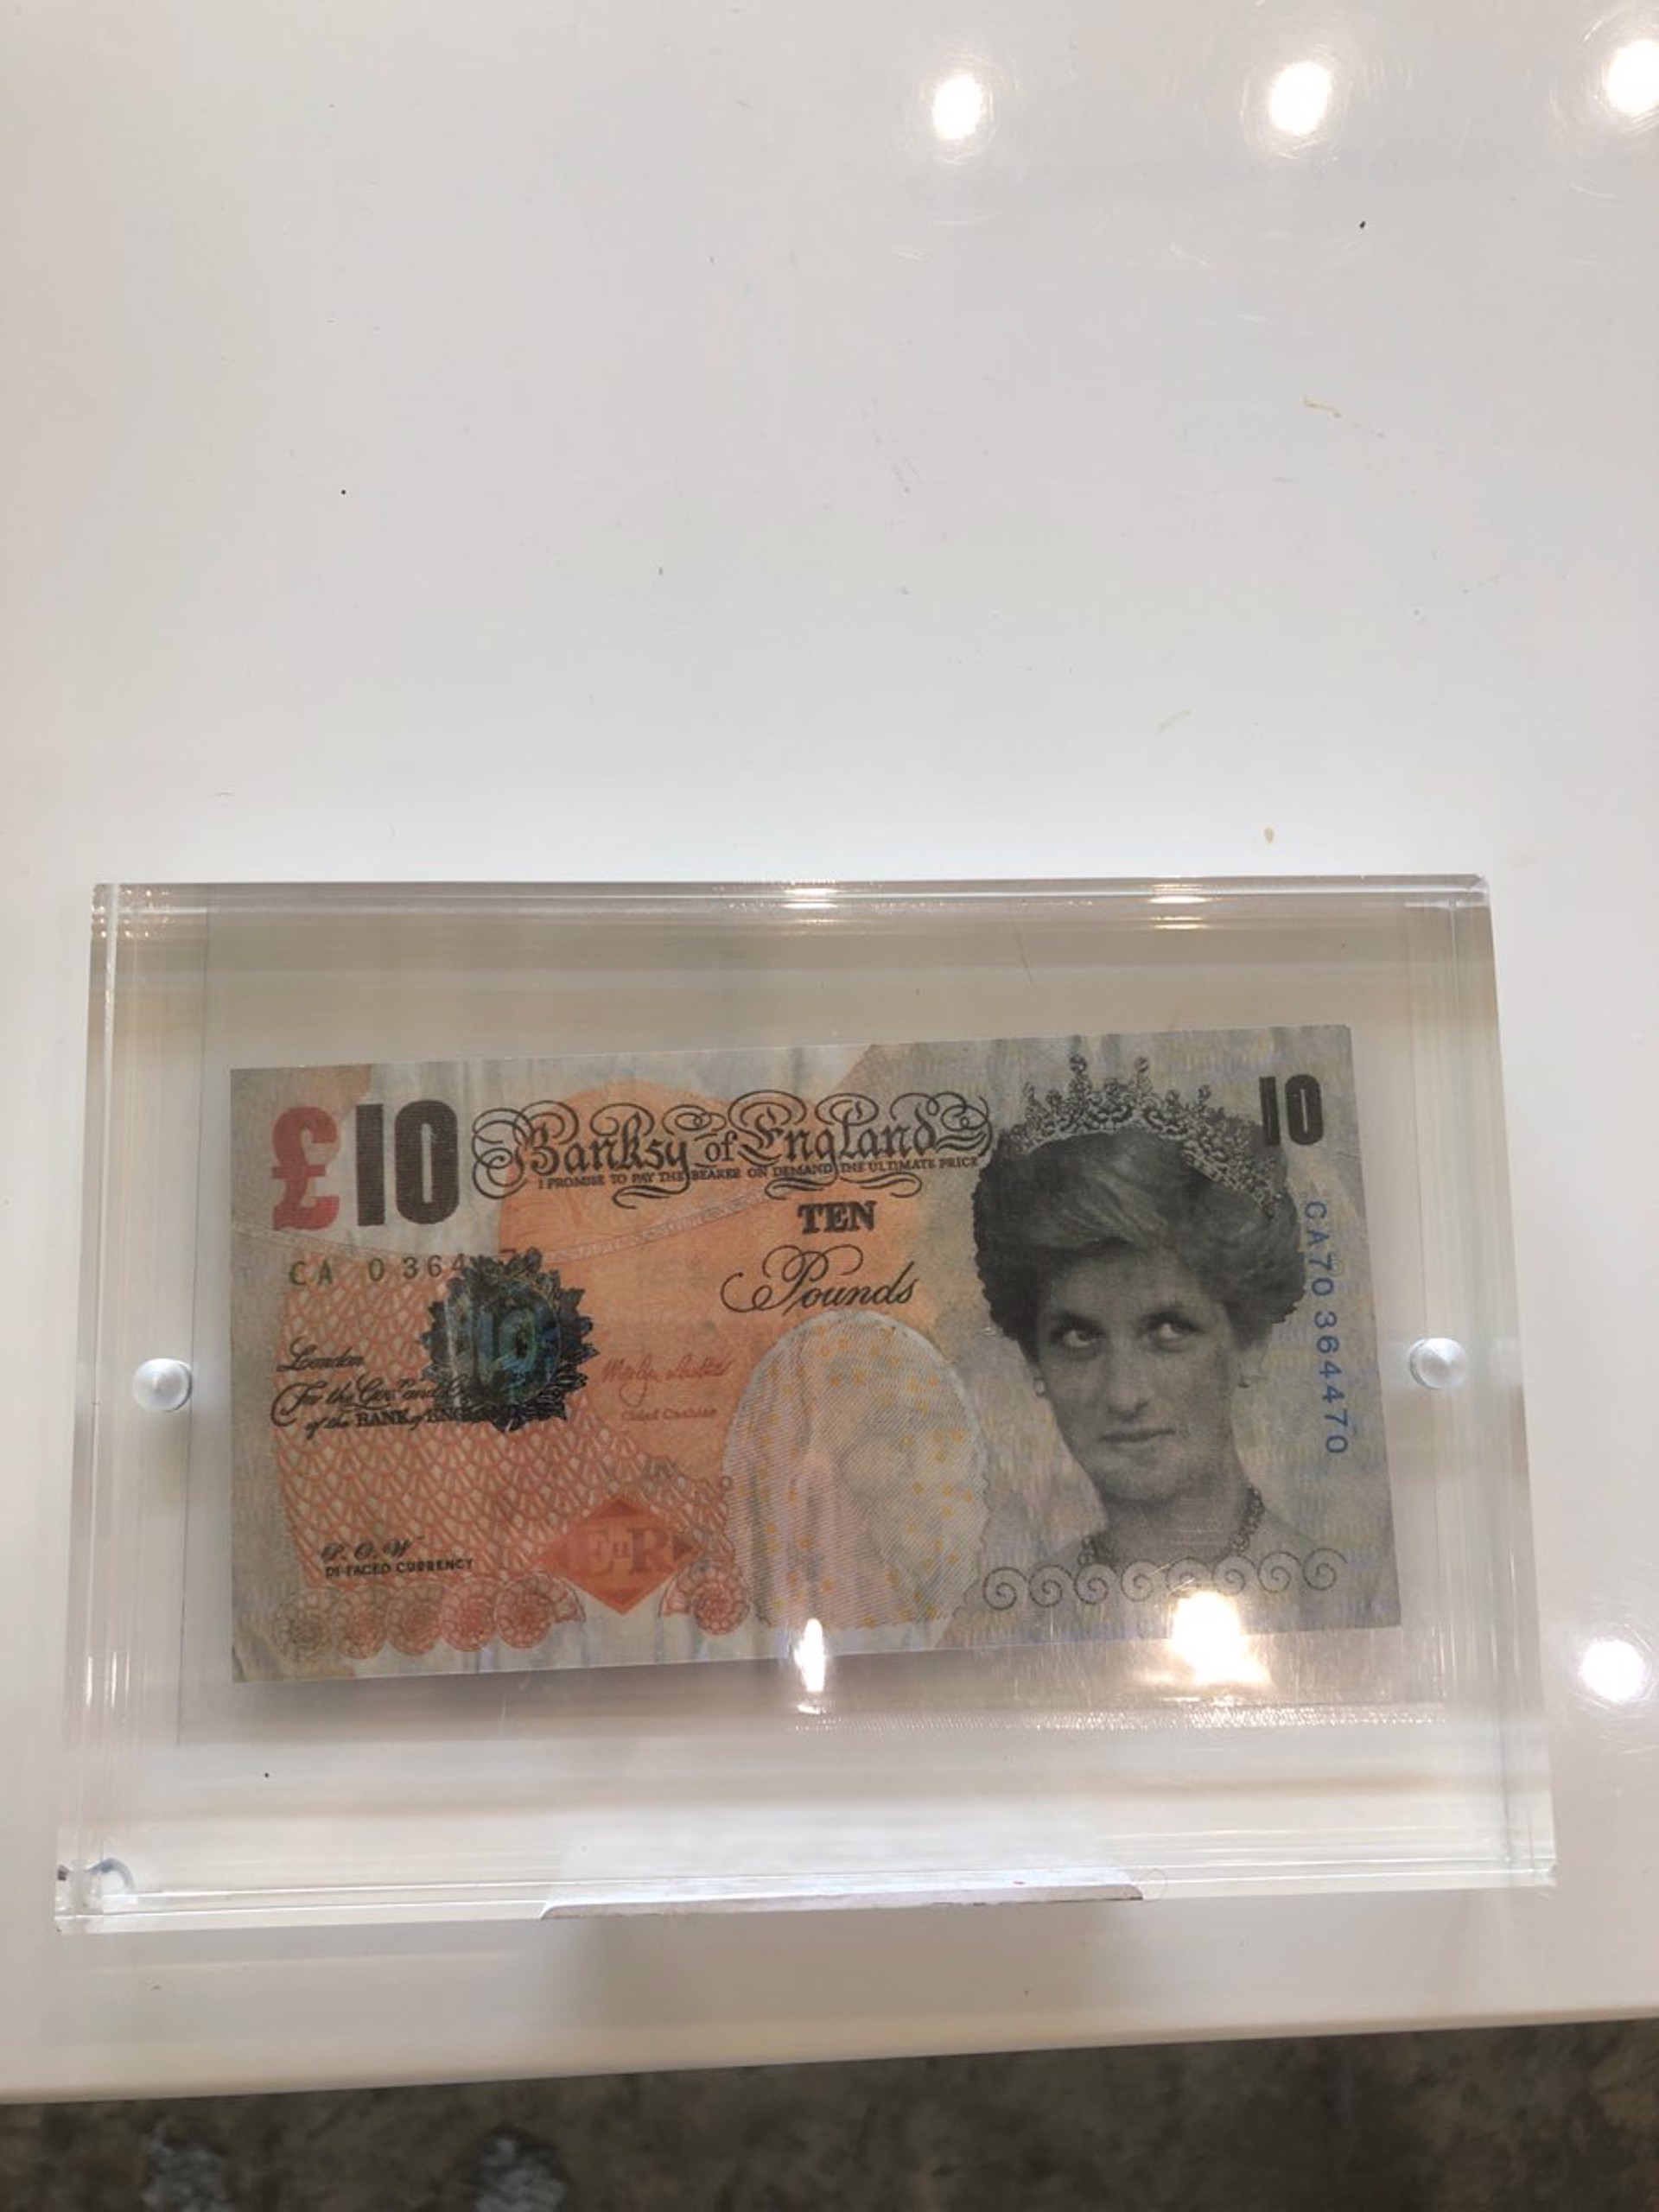 Di - Faced Tenner by Banksy